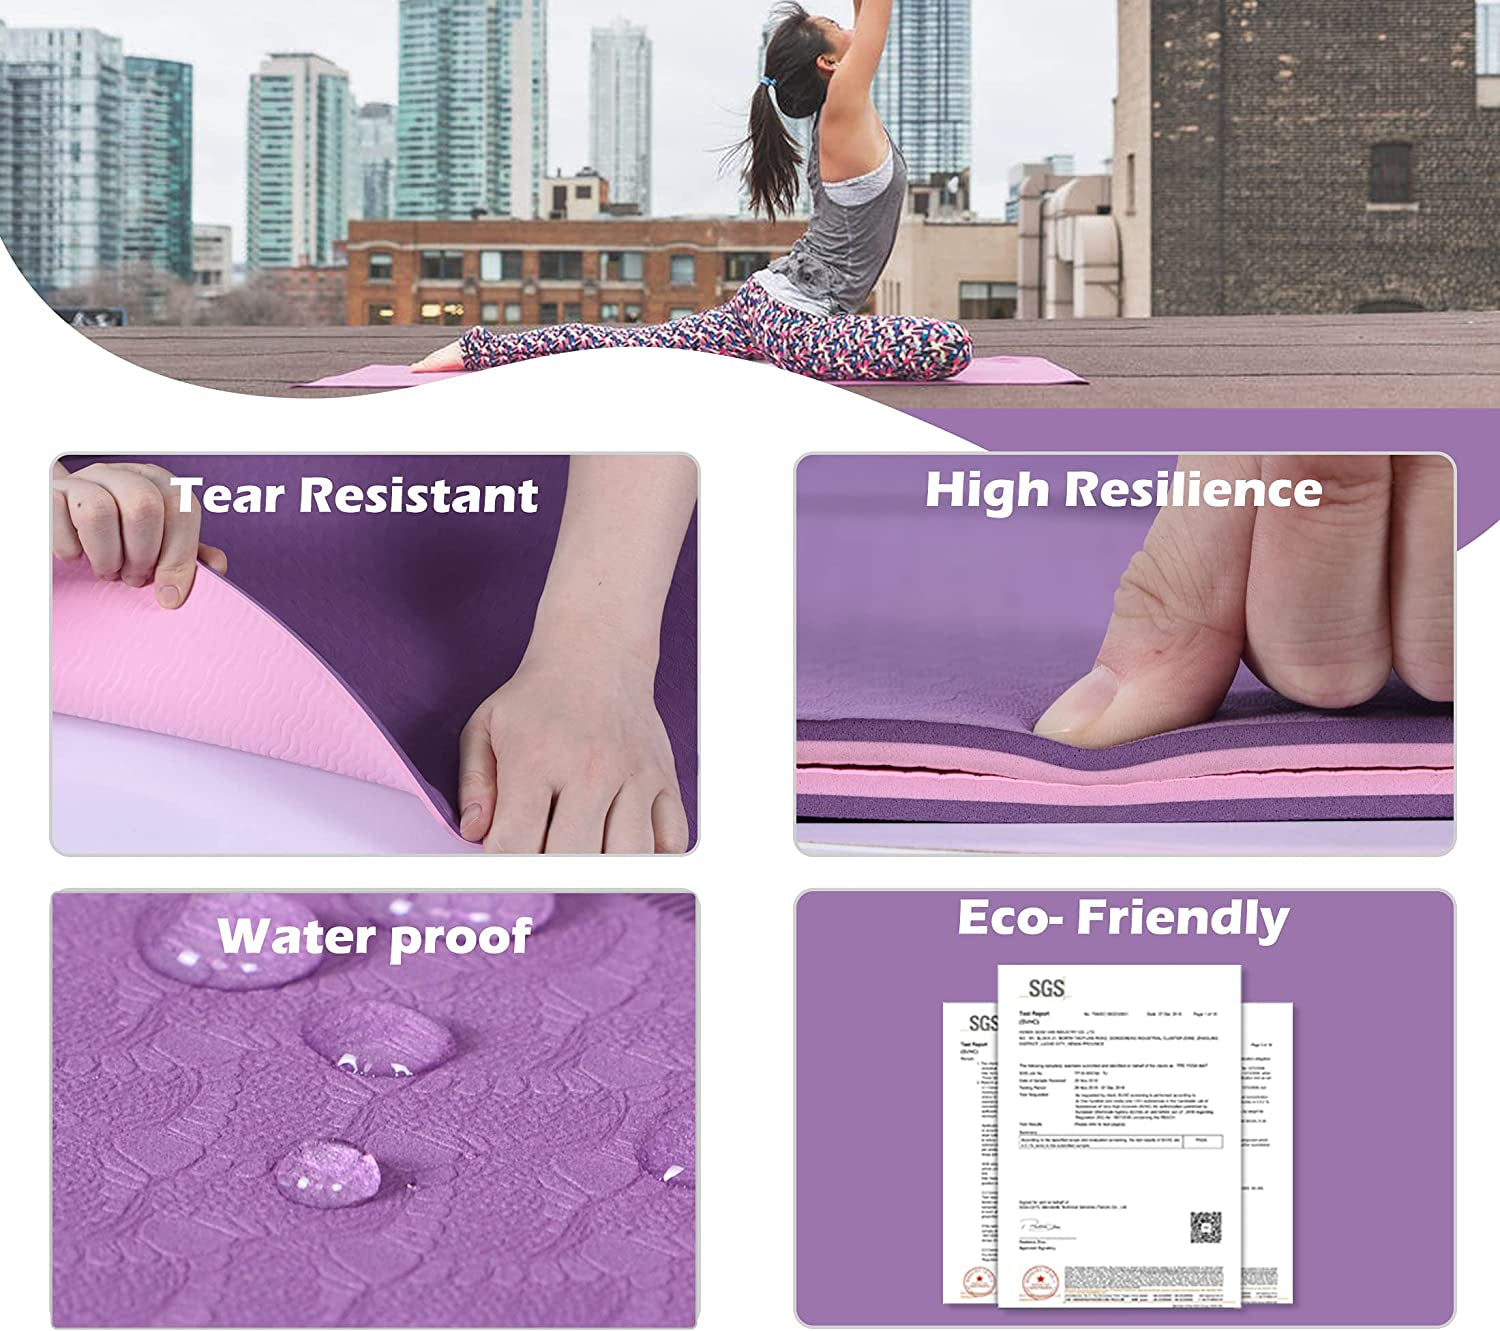 Yoga Mat Non Slip, Pilates Fitness Mats, Eco Friendly, Anti-Tear 1/4" Thick Yoga Mats for Women, Exercise Mats for Home Workout with Carrying Sling and Storage Bag